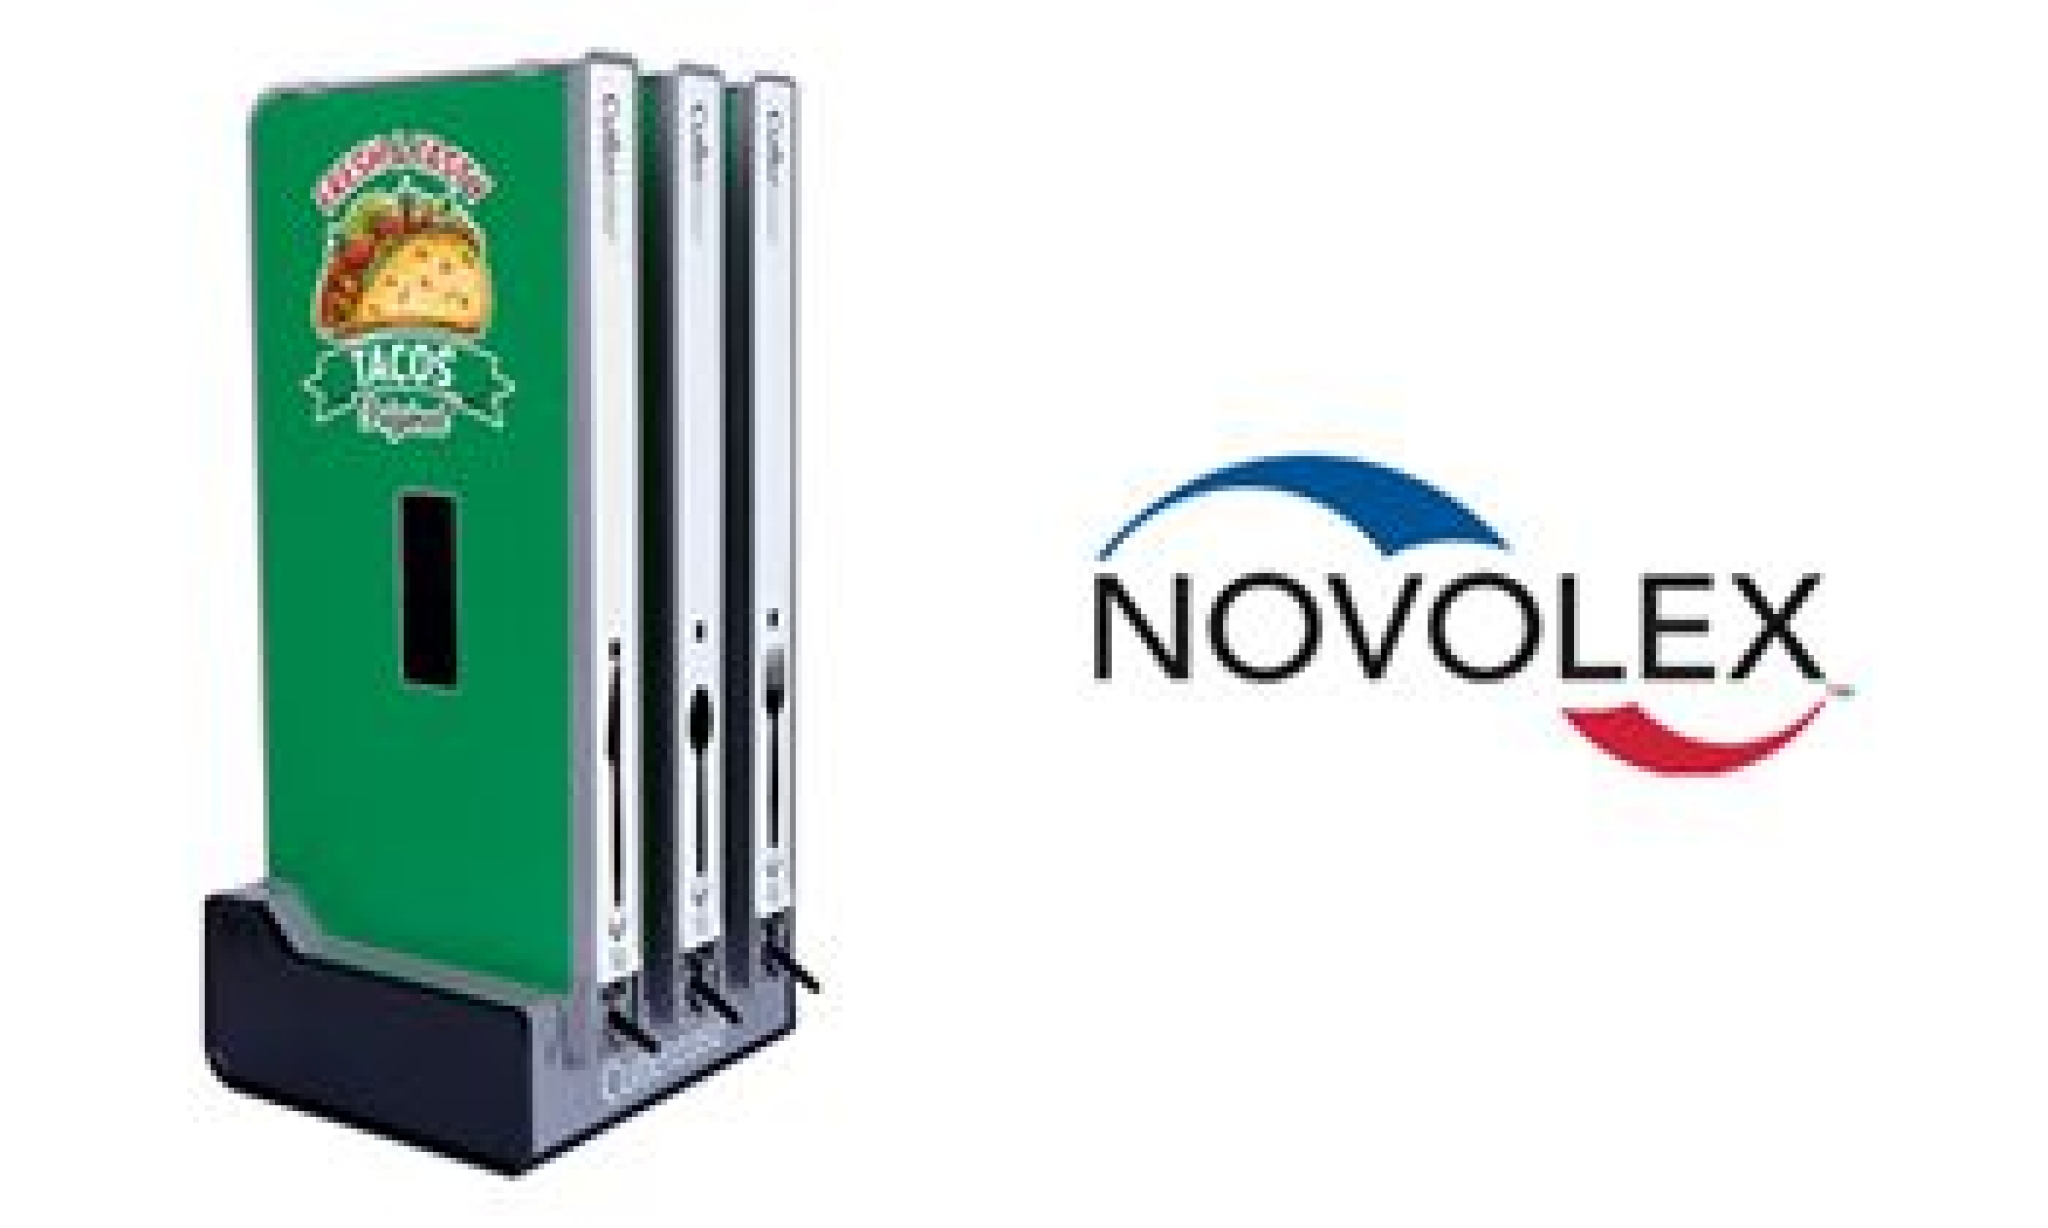 Novolex Expands Family of Cutlerease Dispensers and Offers New Ways to Customize Them